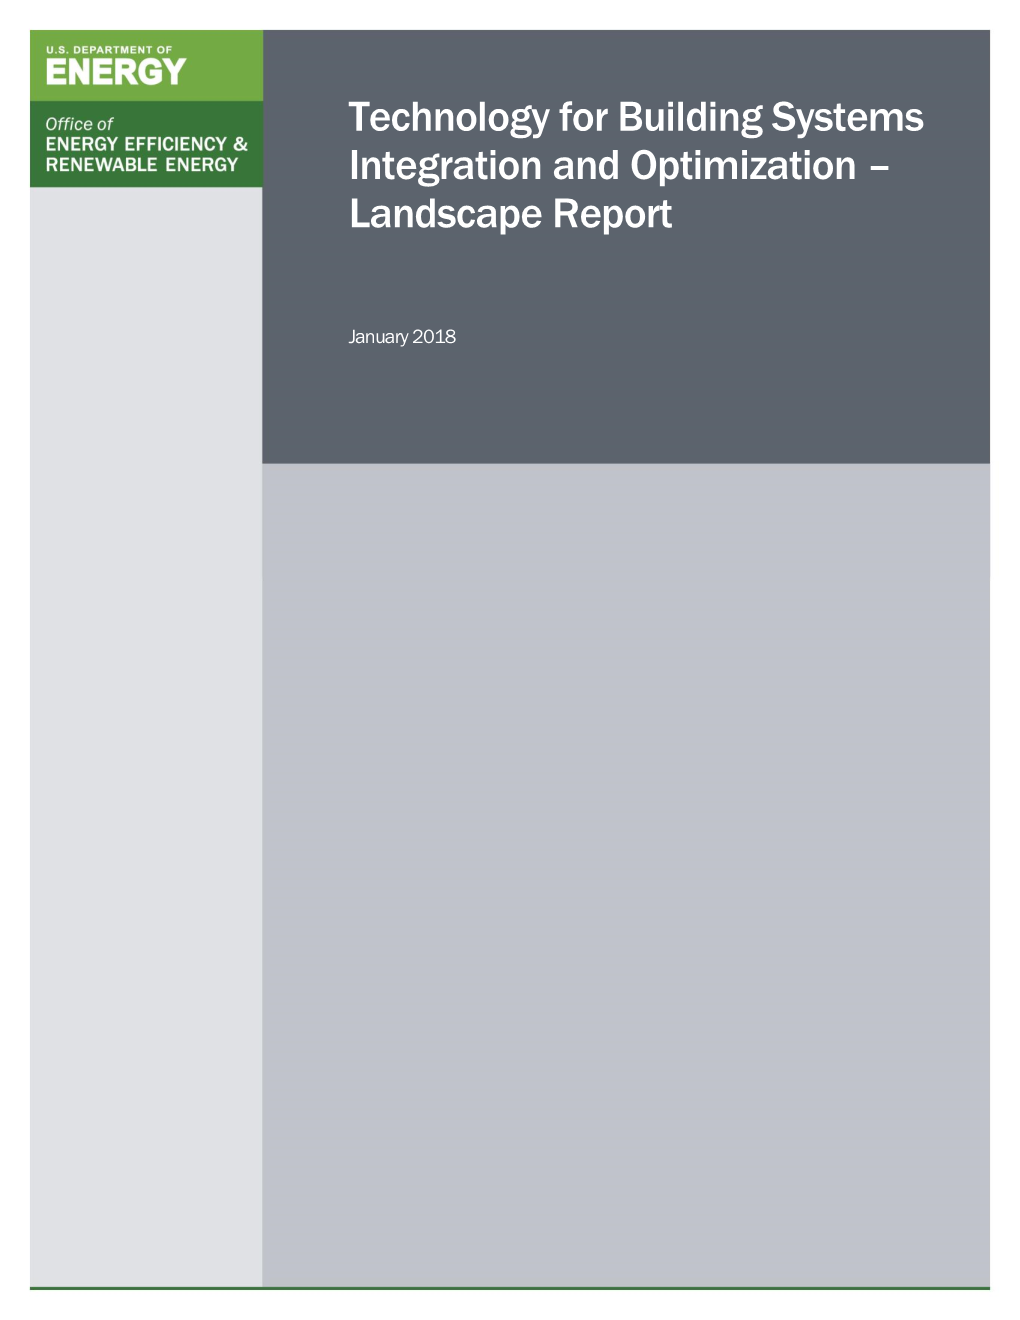 Technology for Building Systems Integration and Optimization – Landscape Report